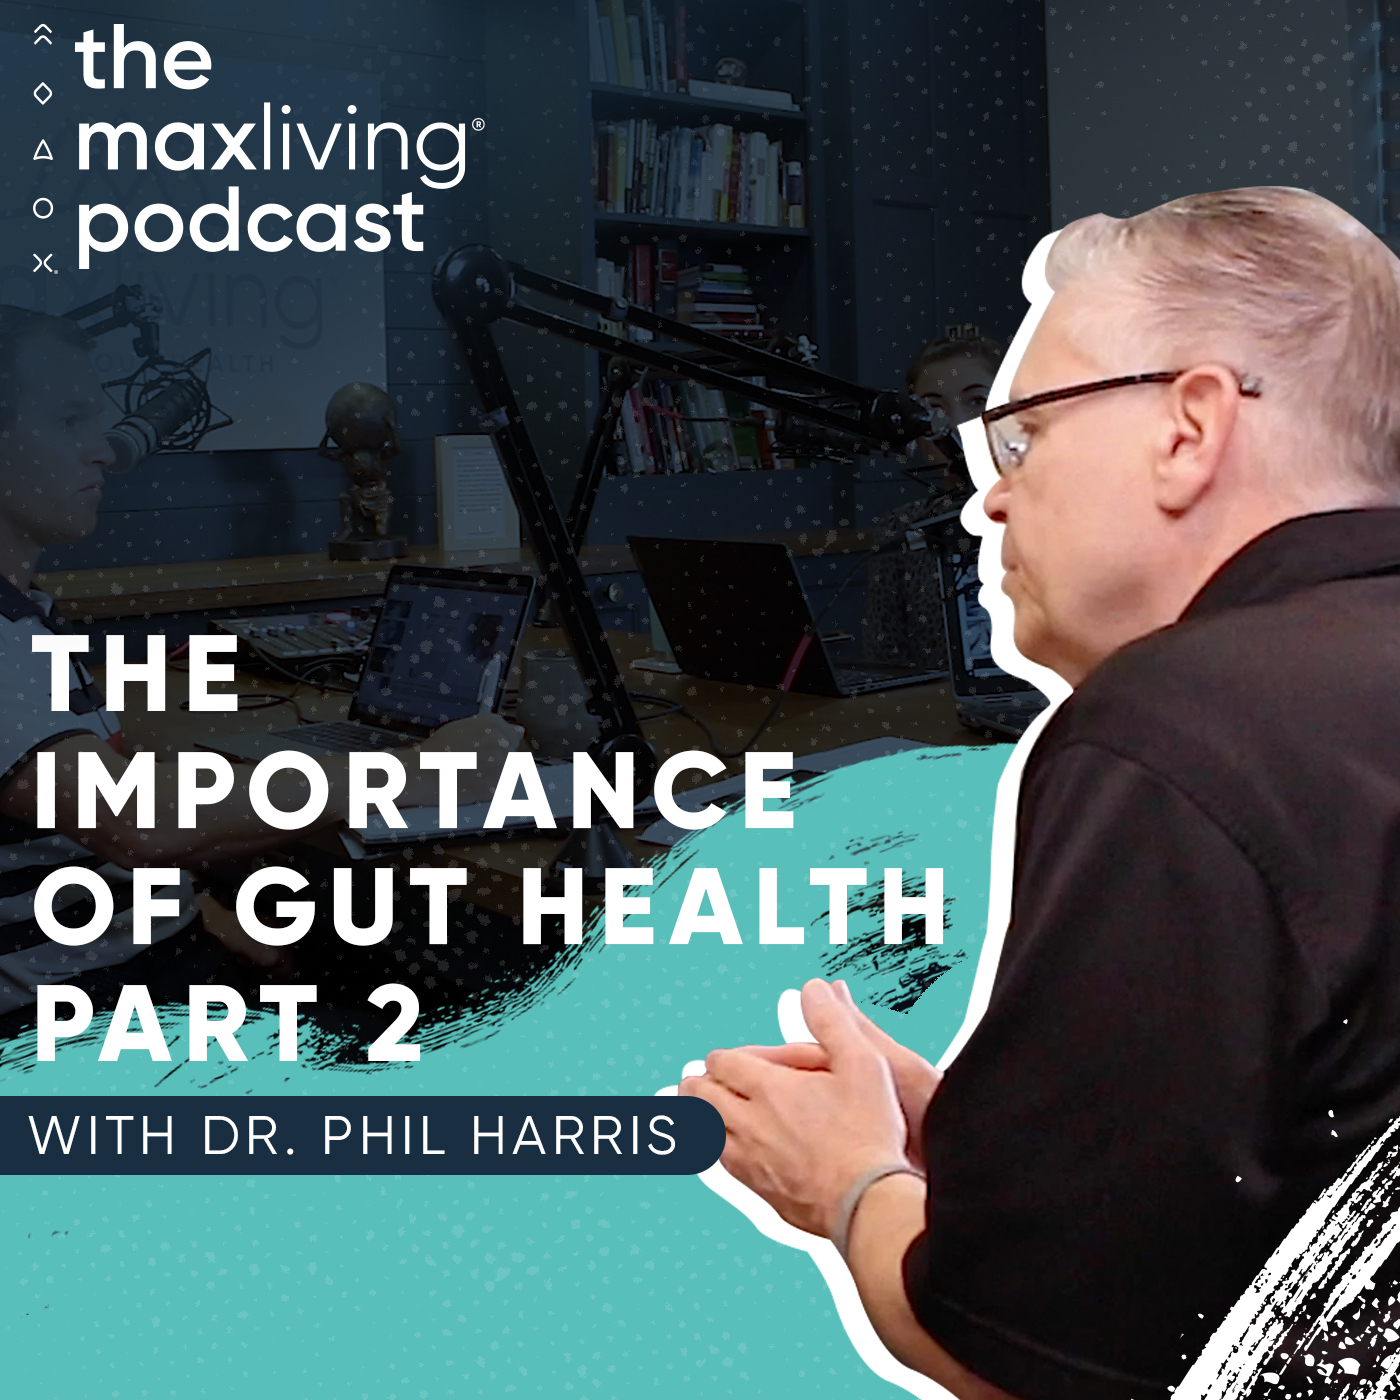 The Importance of Gut Health Part 2